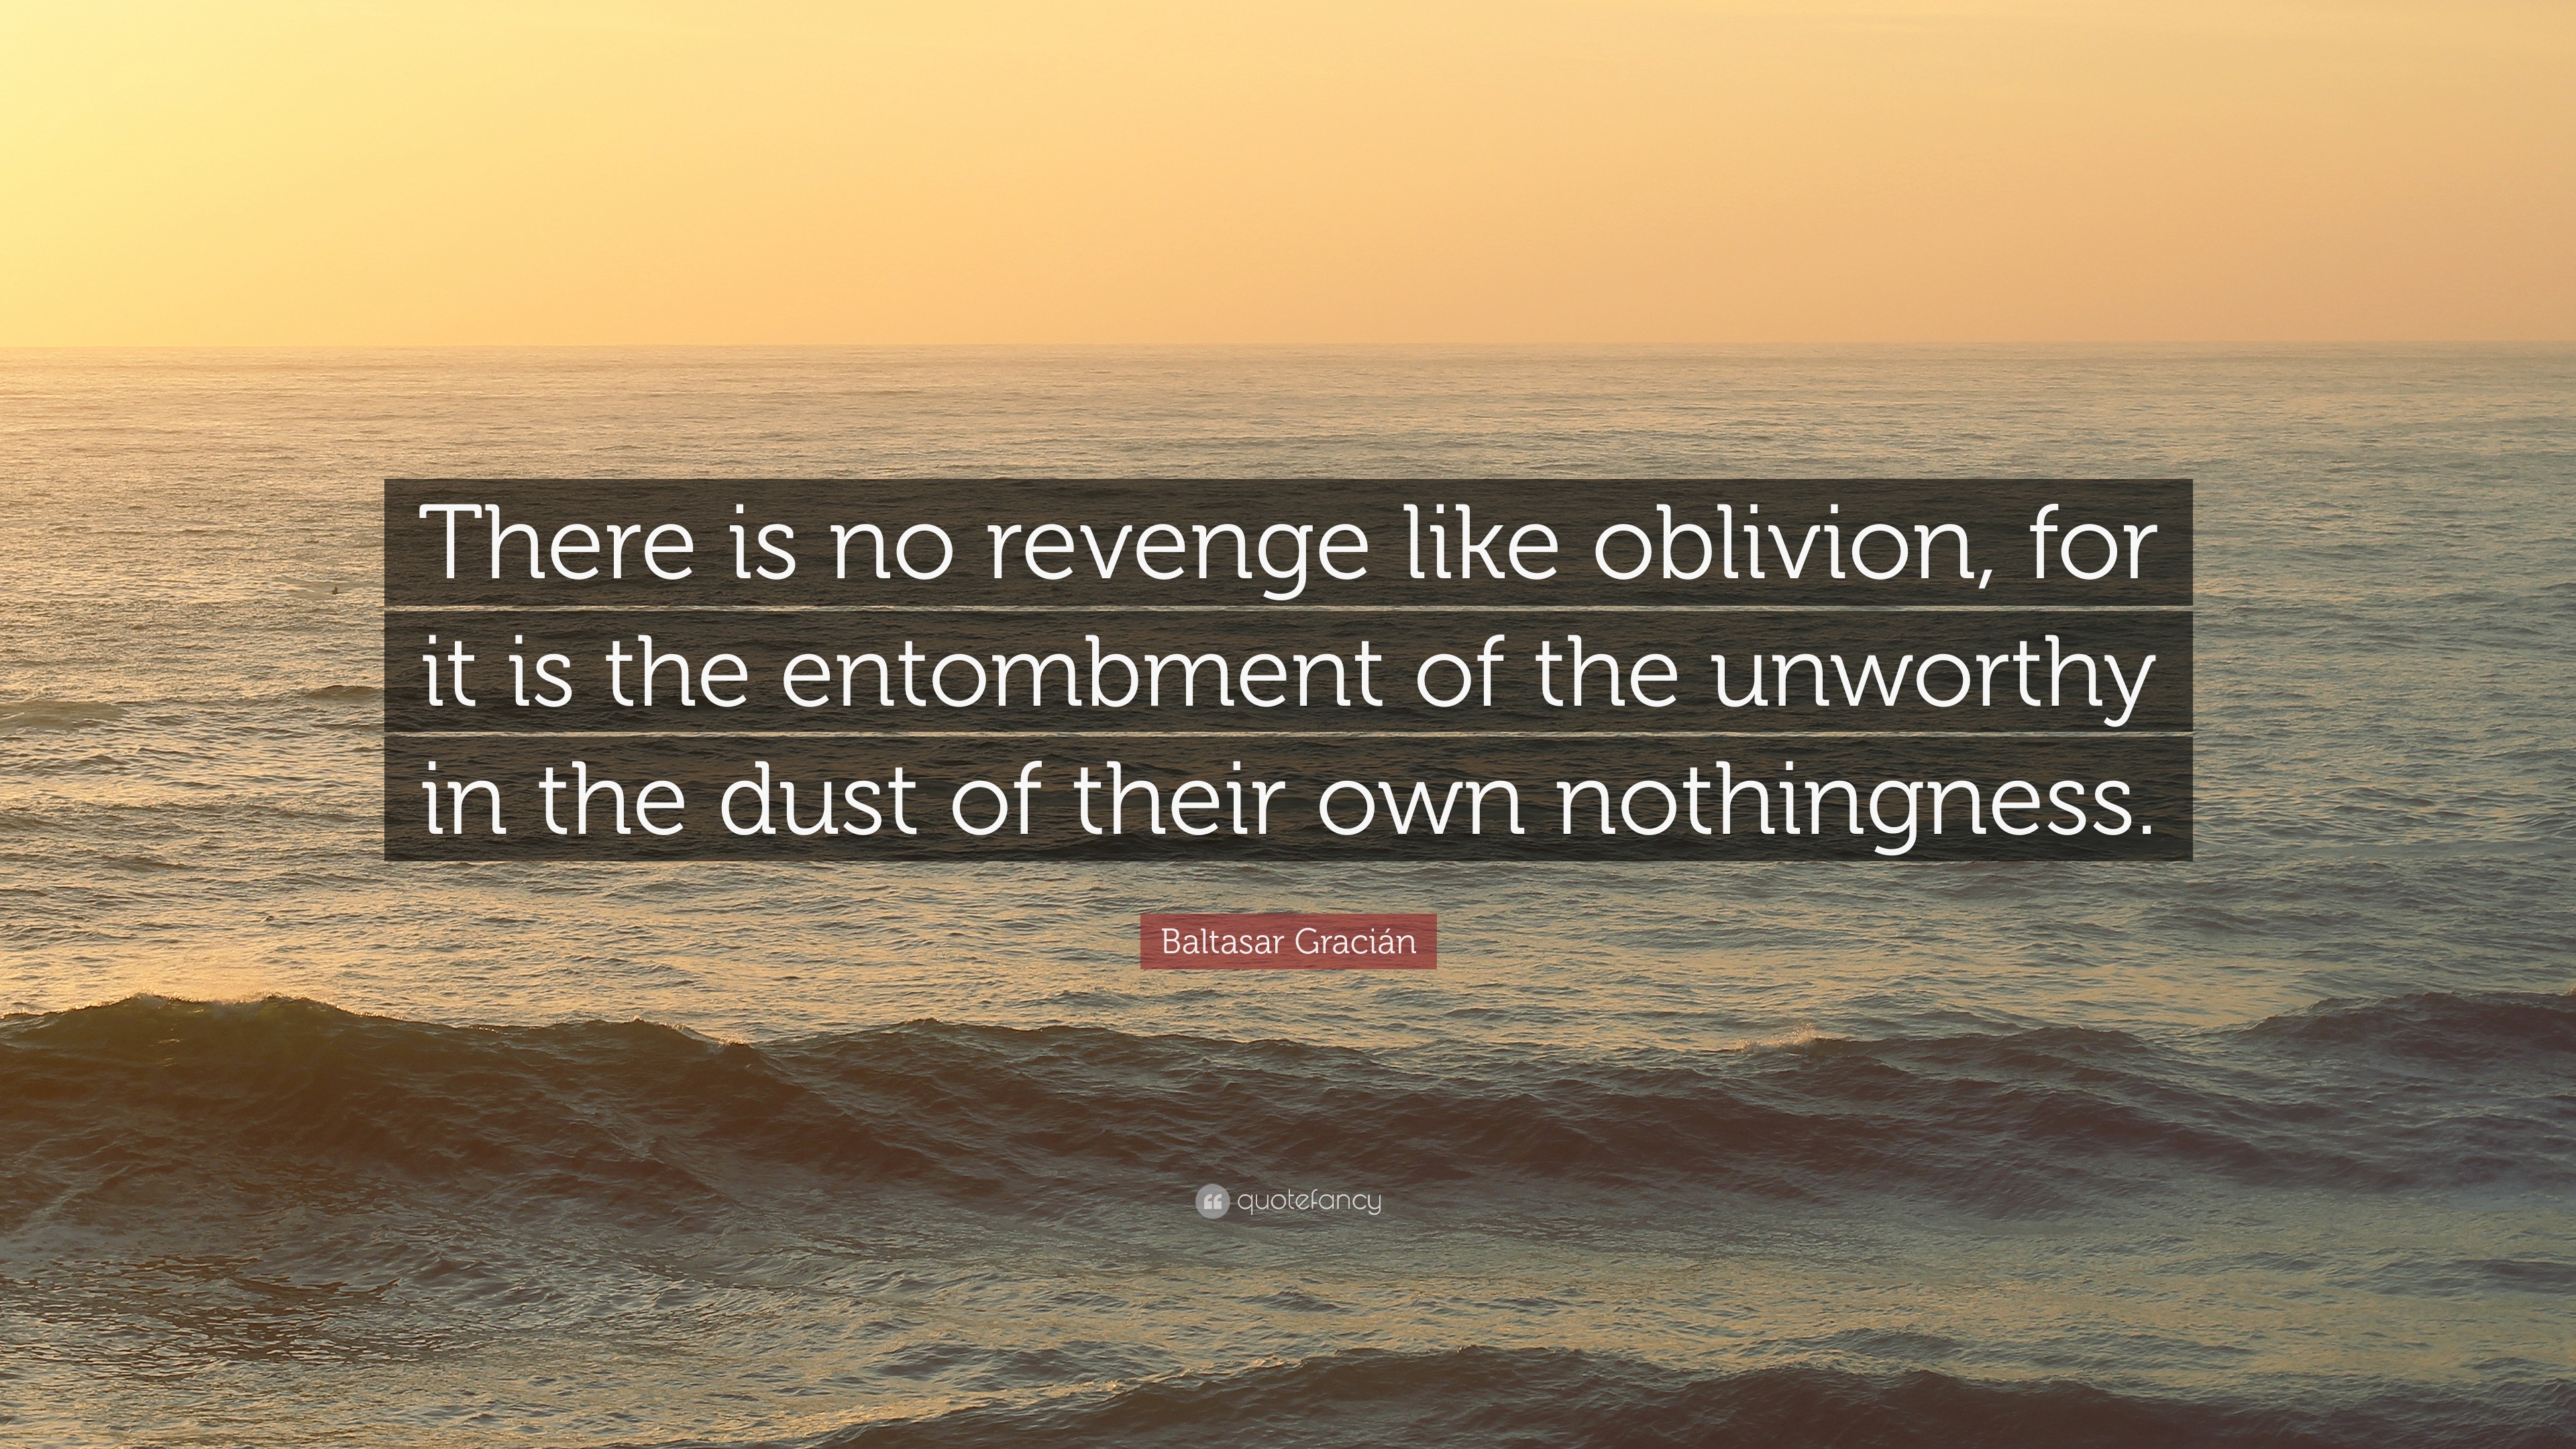 2504165-Baltasar-Graci-n-Quote-There-is-no-revenge-like-oblivion-for-it-is.jpg